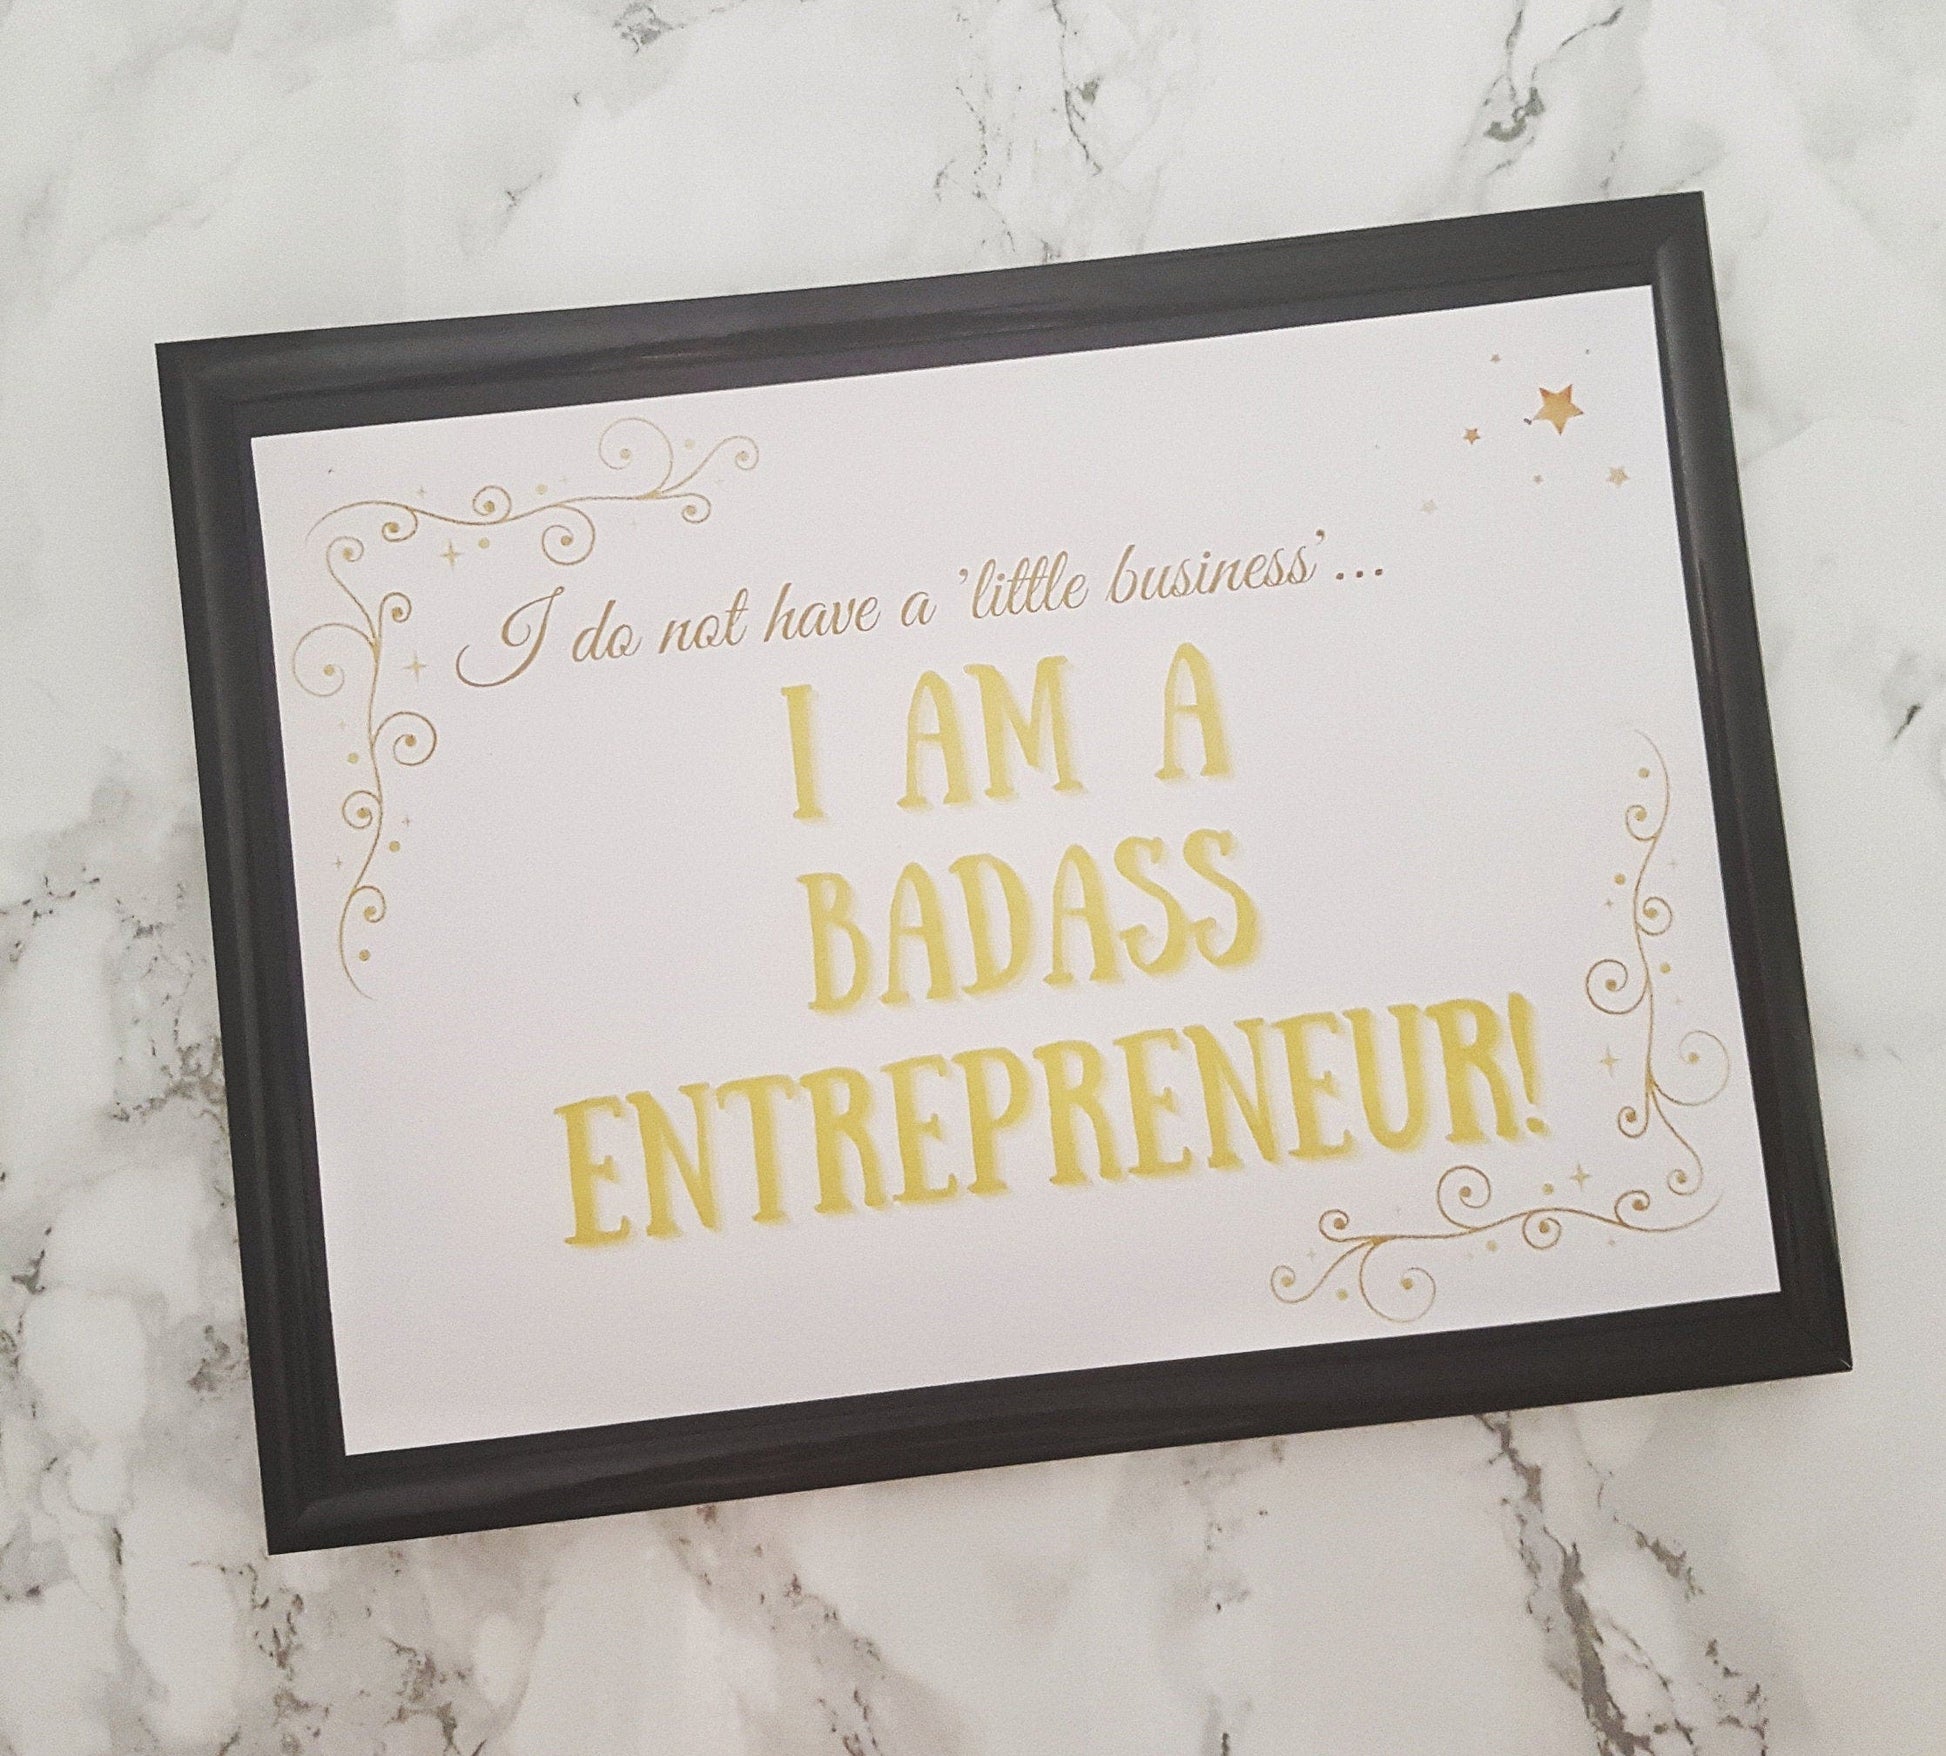 Inspirational quote for female small business owners 'I am a badass entrepreneur' printed on card and displayed in black frame for demonstration purposes